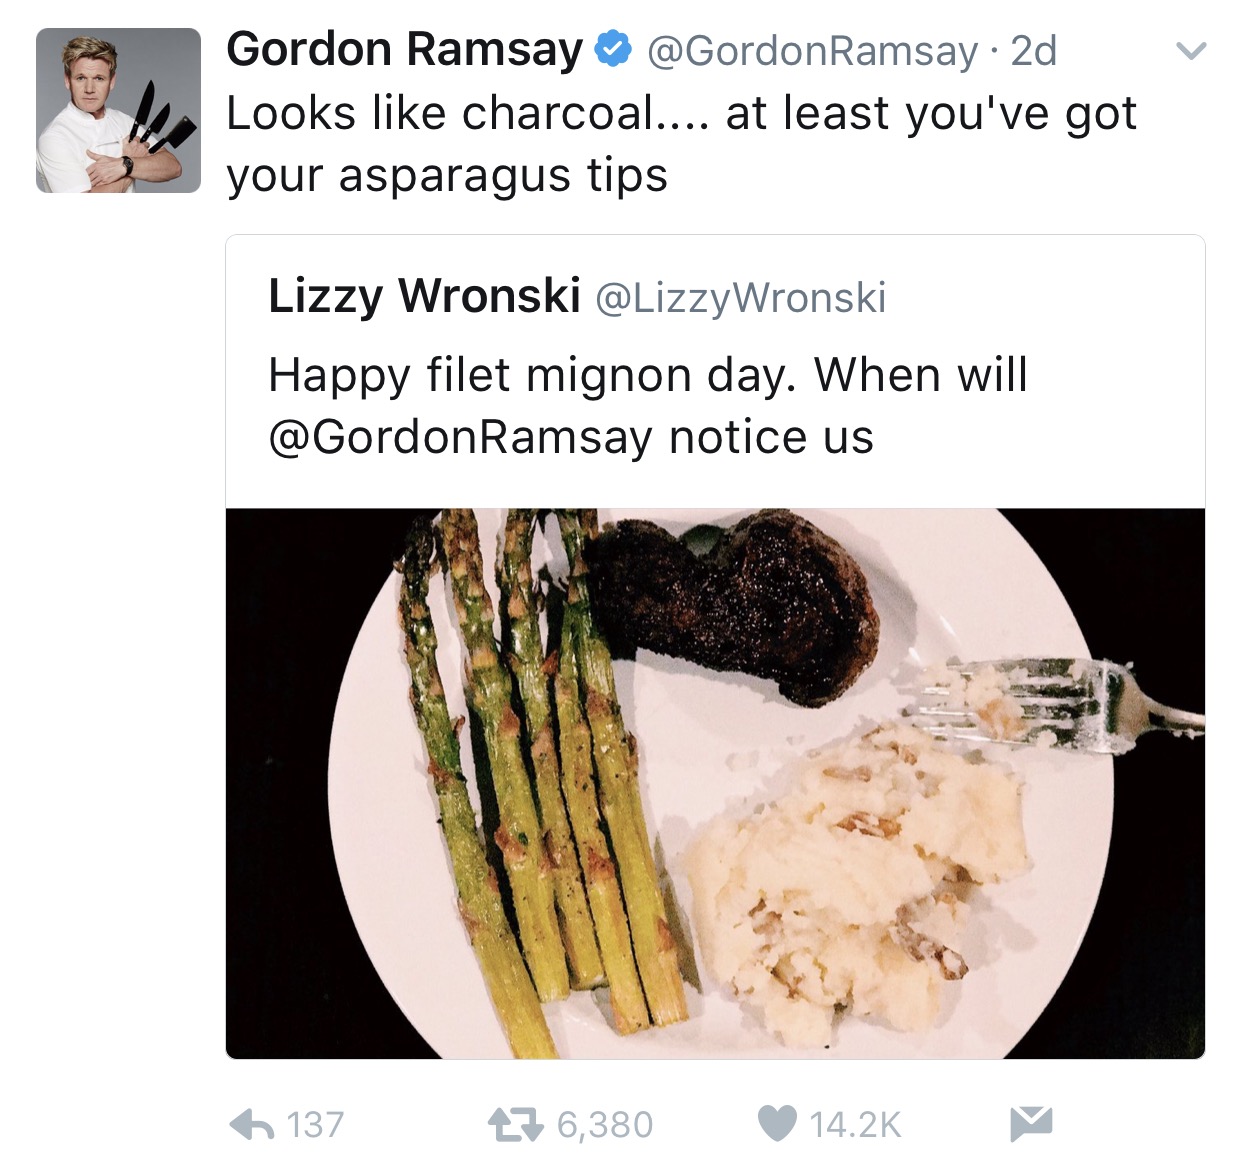 tweet - gordon ramsay funny twitter - v Gordon Ramsay Ramsay 2d Looks charcoal.... at least you've got your asparagus tips Lizzy Wronski Happy filet mignon day. When will Ramsay notice us 6 137 27 6,380